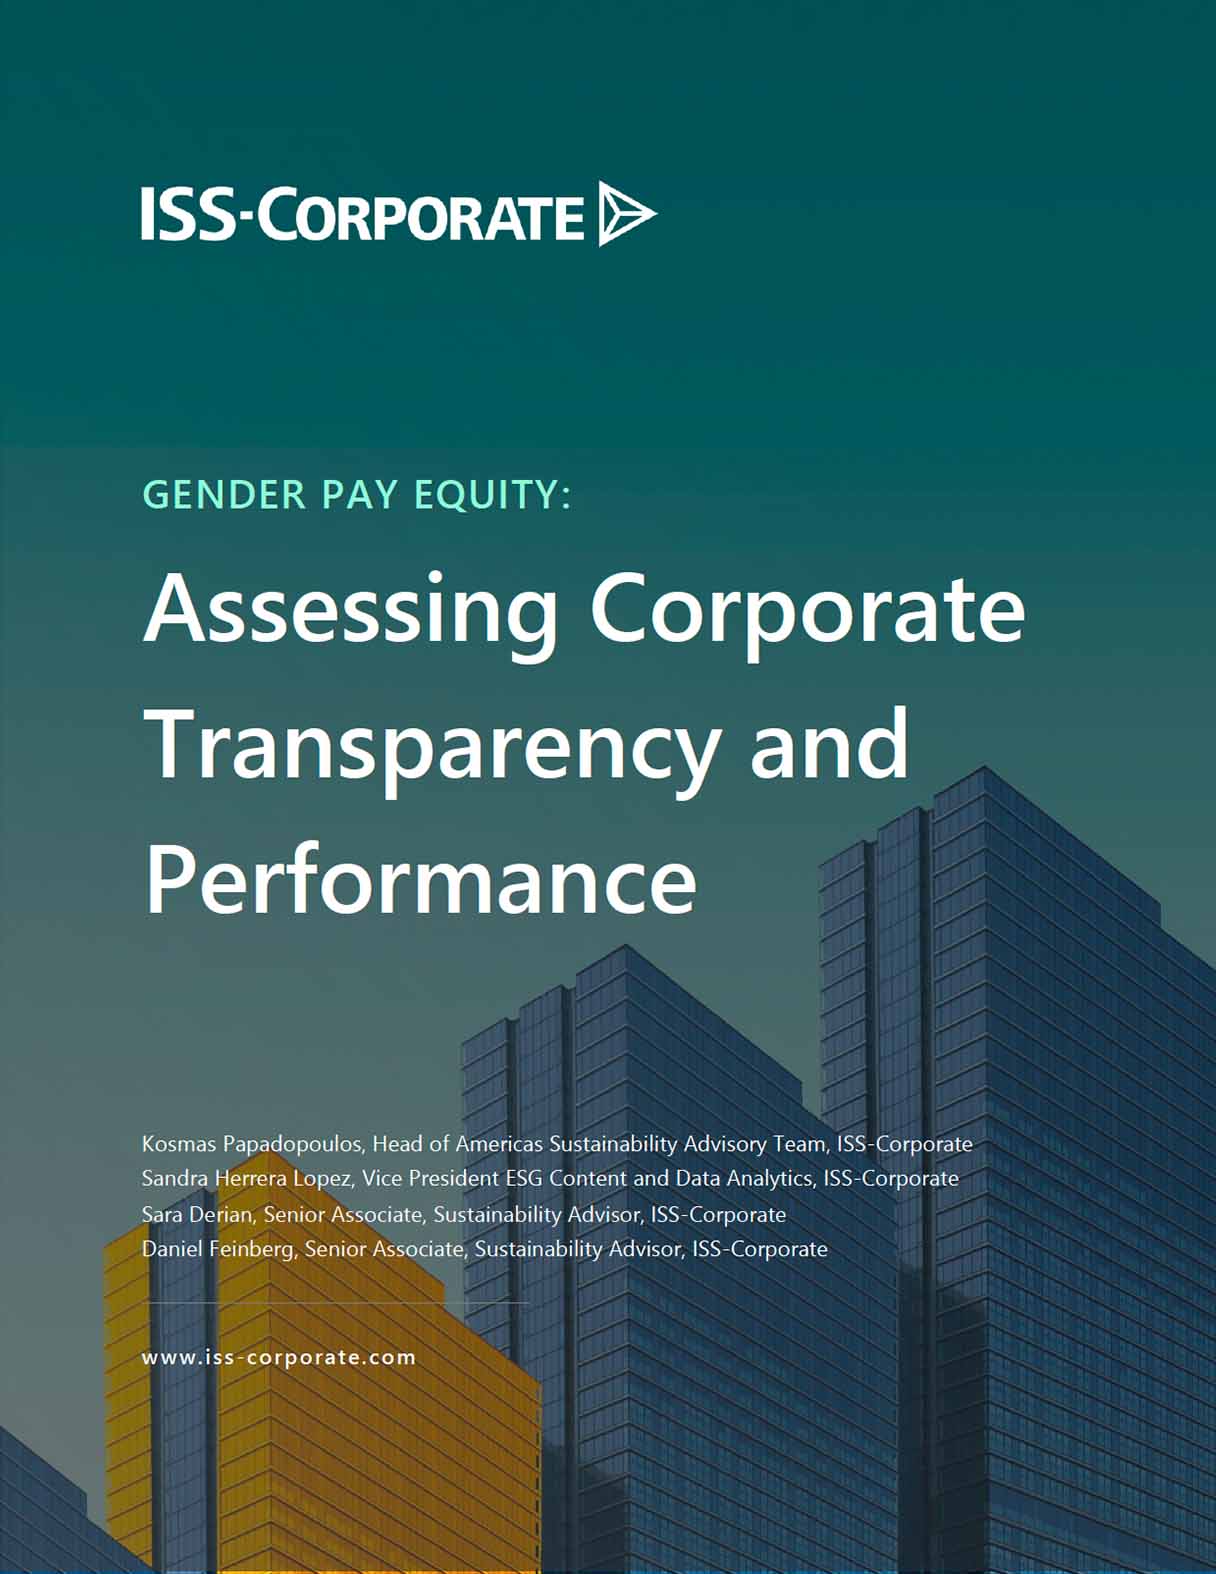 Gender Pay Equity: Assessing Corporate Transparency and Performance